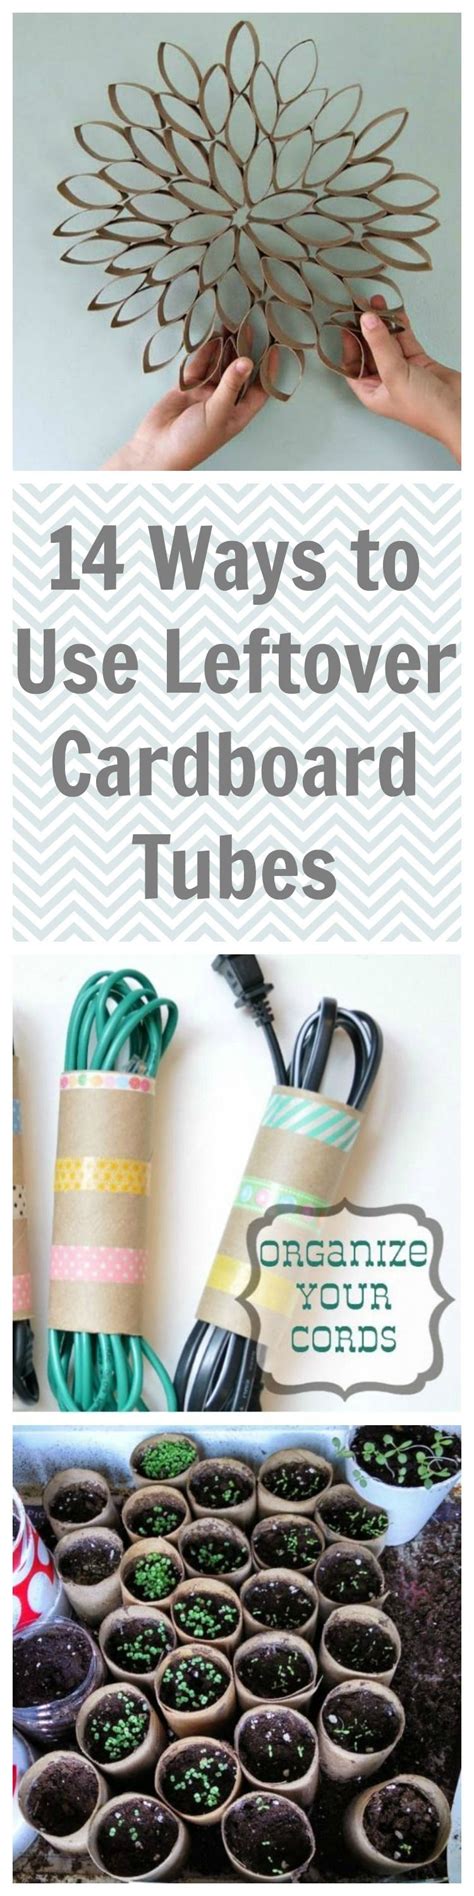 New Uses For Cardboard Tubes That Are Straight Up Genius Cardboard Tube Crafts Cardboard